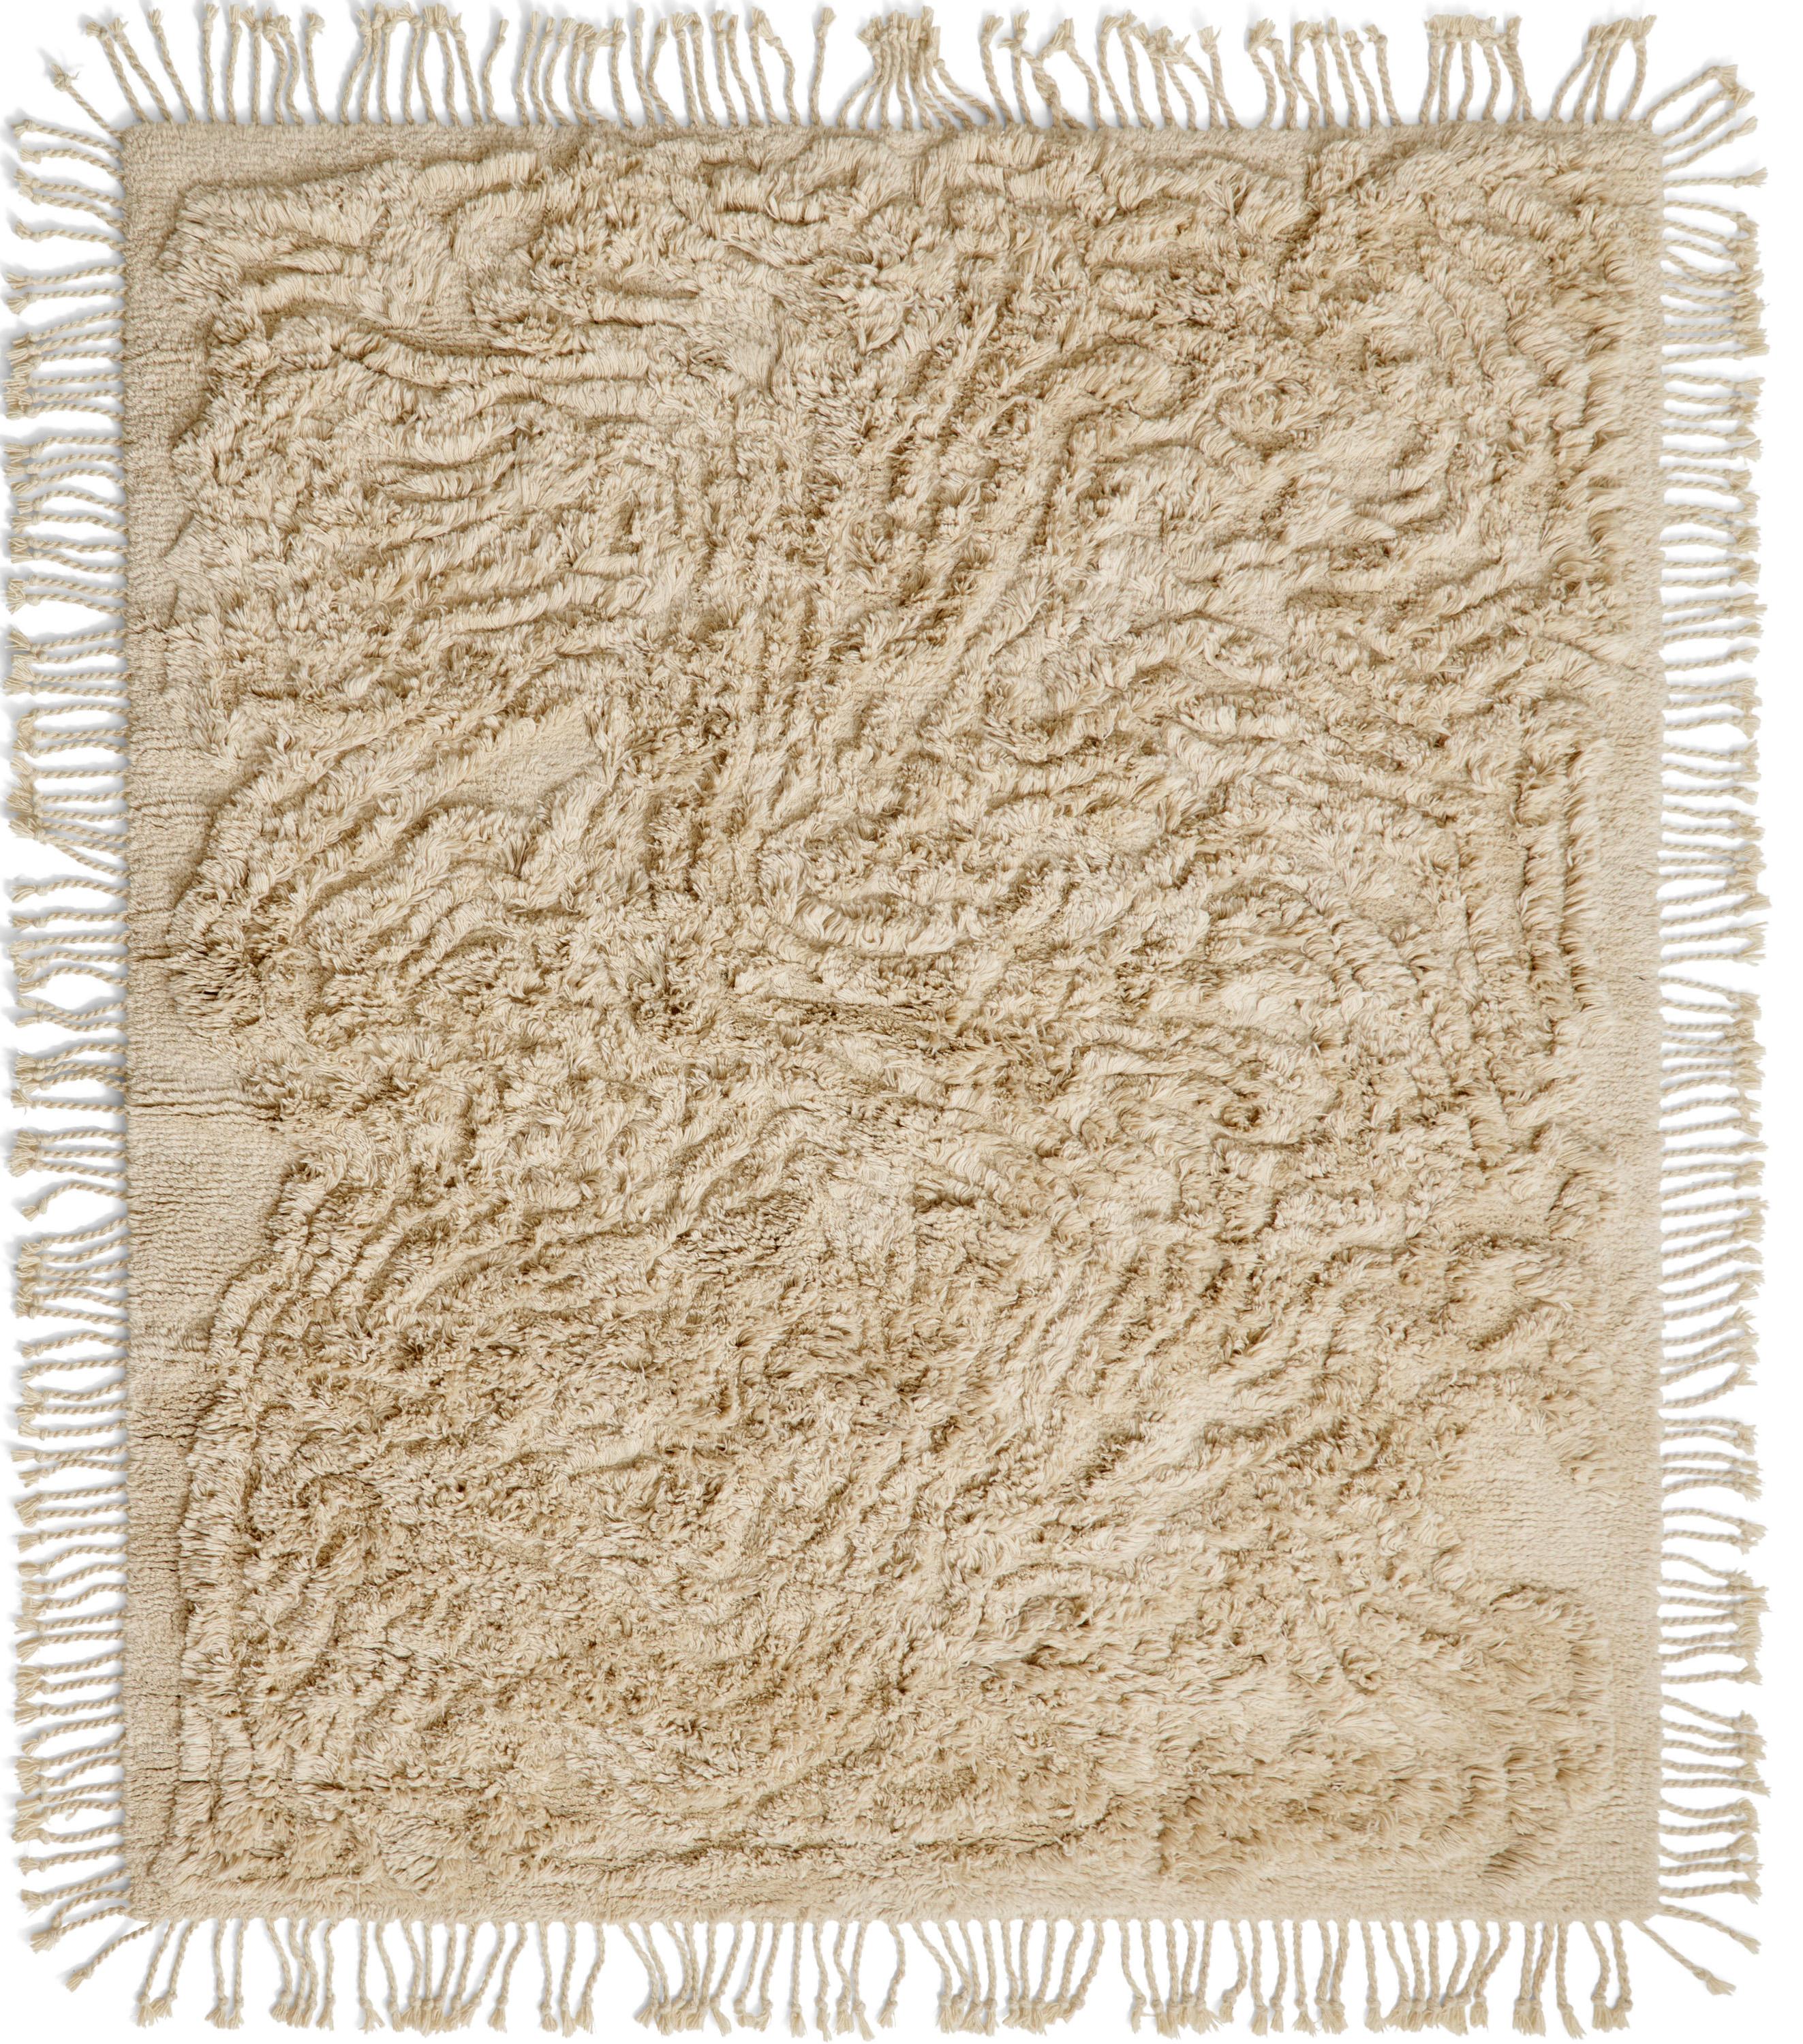 No.13 Rug by Cappelen Dimyr
Dimensions: D290 x H350 cm
Materials: 85% wool 15% cotton

no.13 is fully hand-knotted and sports a hand cut pattern. The twisted wool fringes along all sides of the rug are a striking emphasis on its artistic